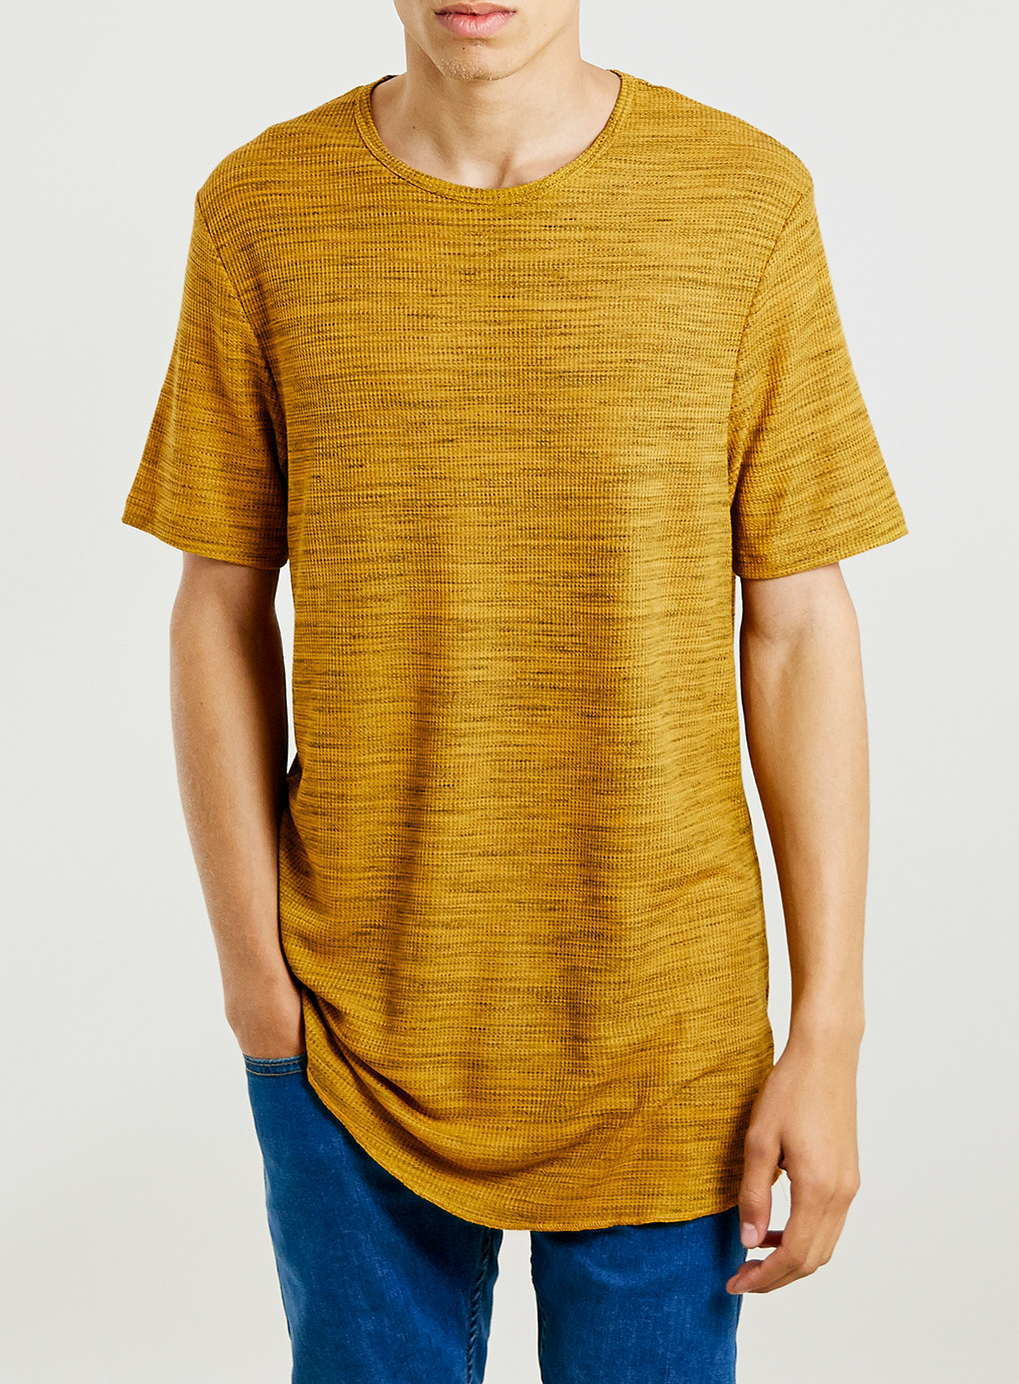 TOPMAN Synthetic Mustard Waffle Slim Fit T-shirt in Yellow for Men - Lyst